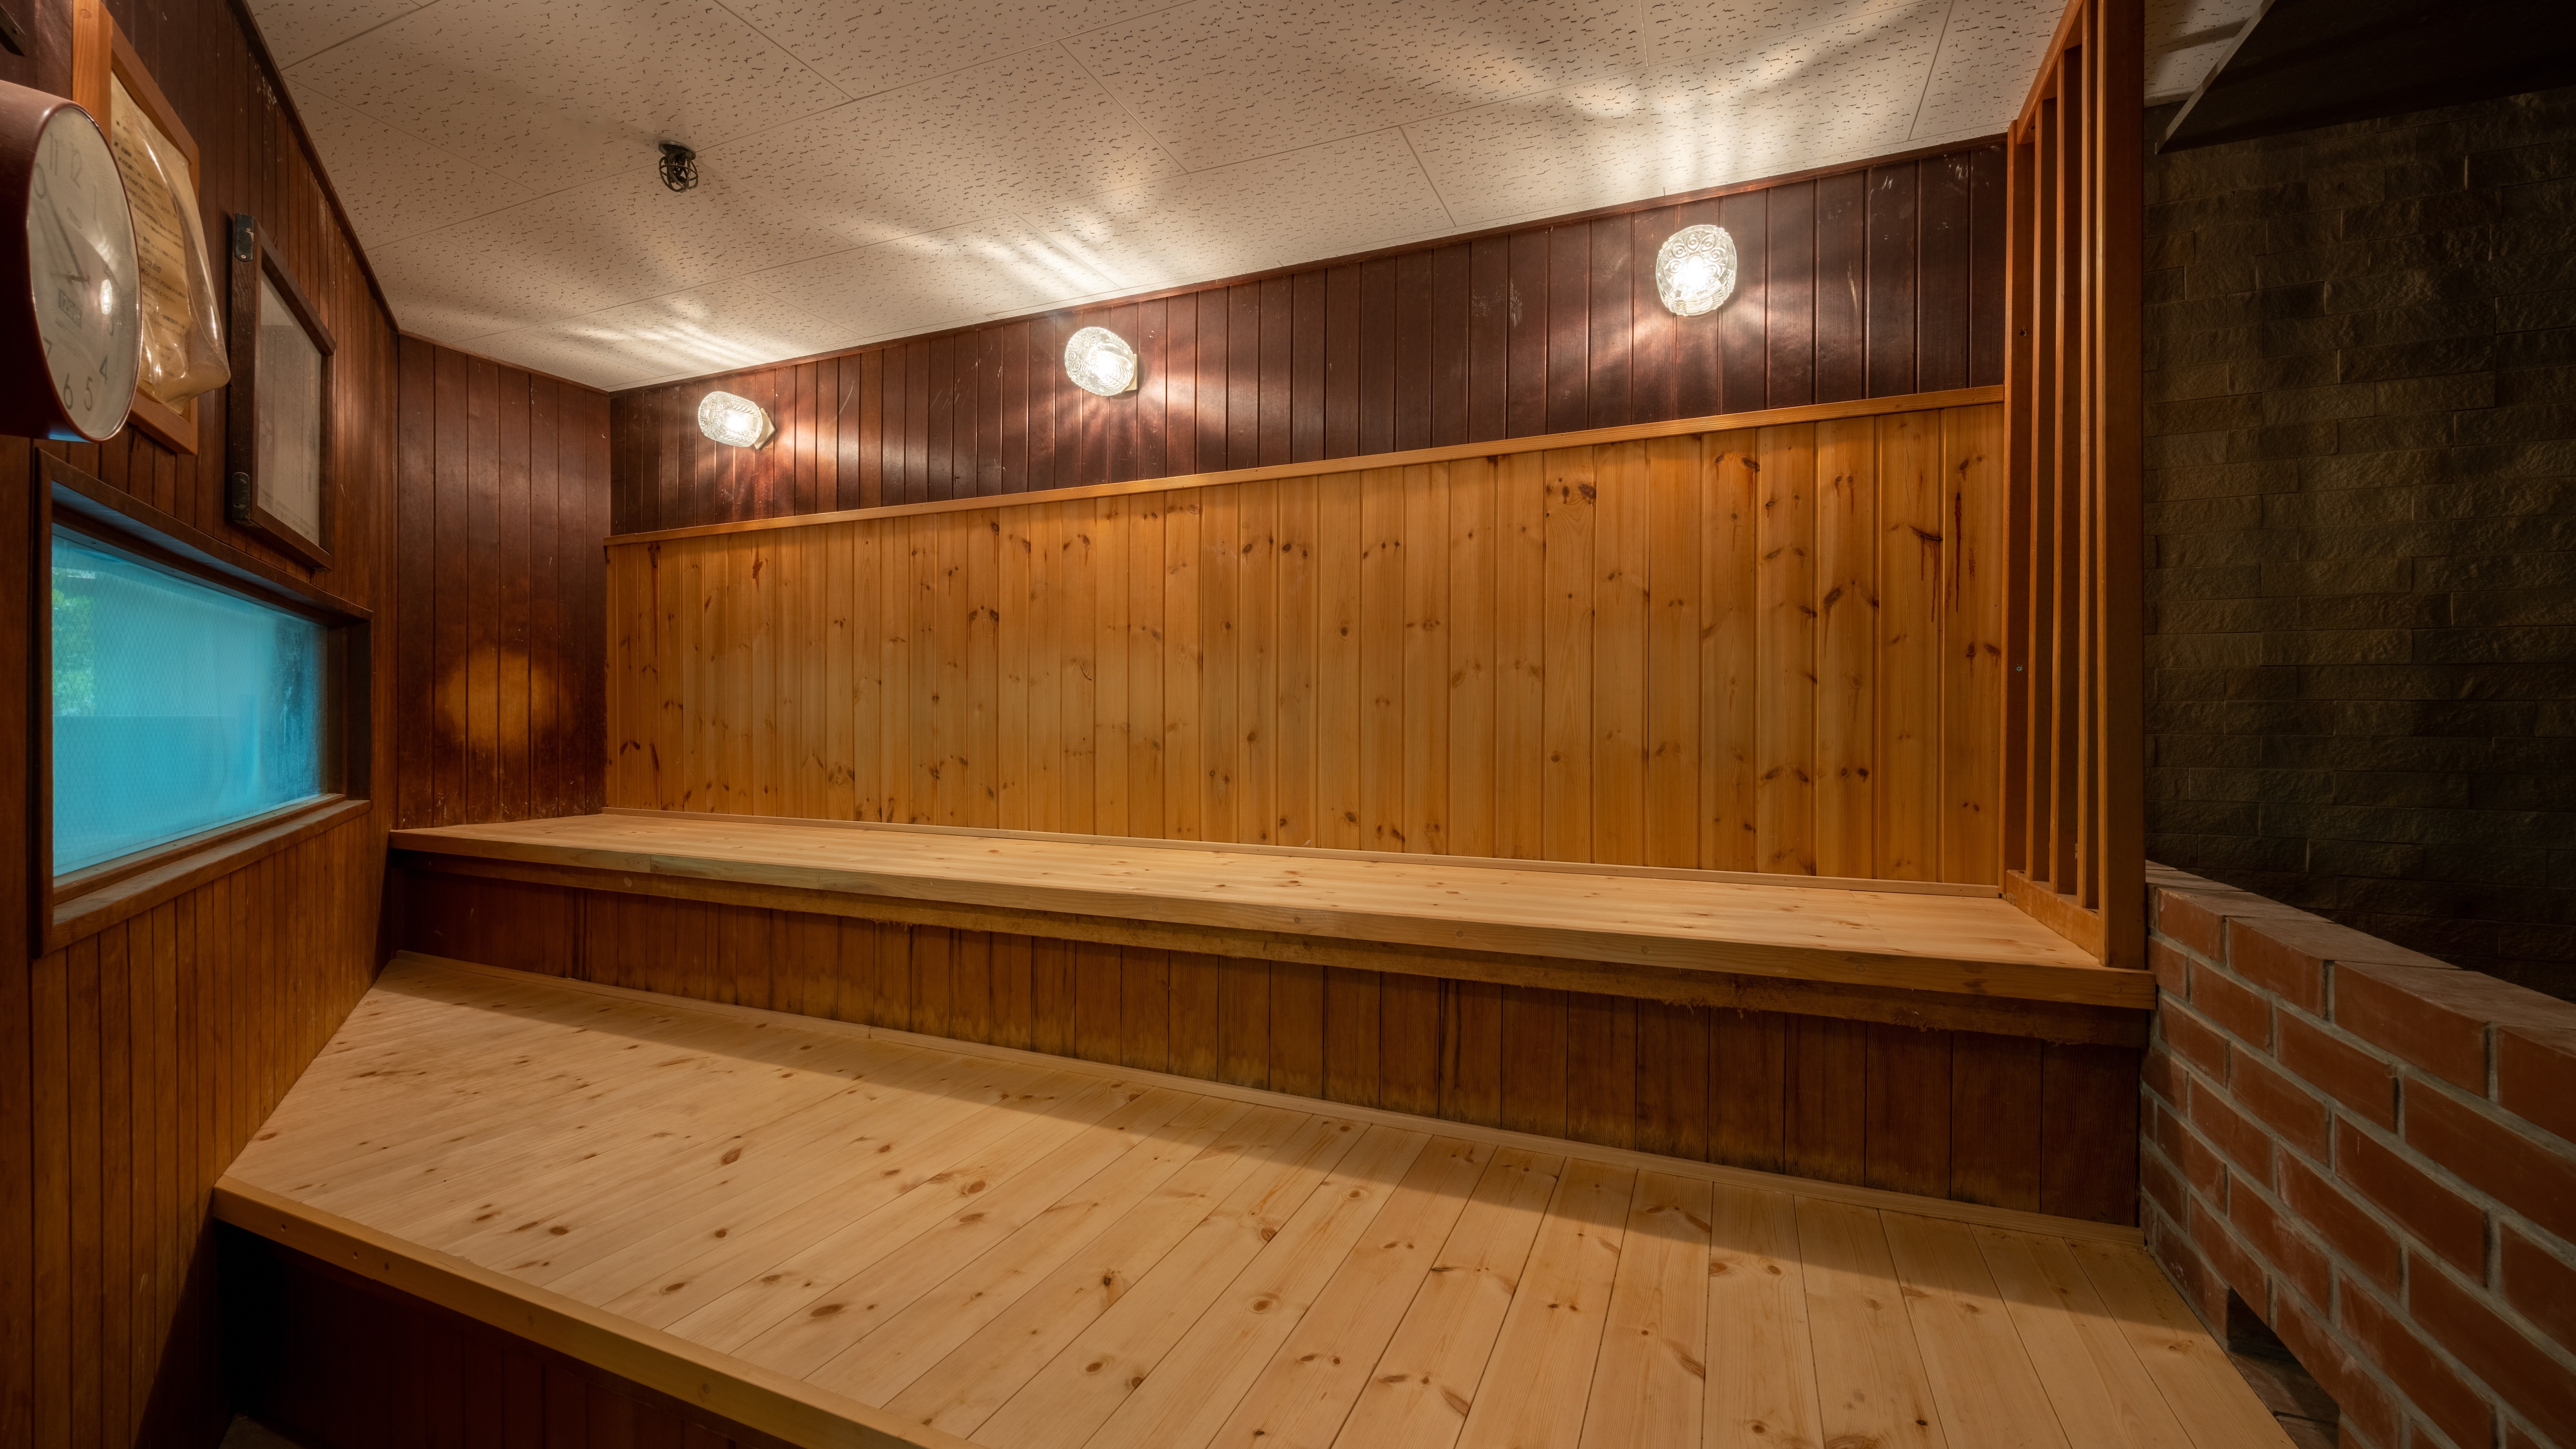 [Sauna] After sweating in the sauna, how about a "Totou" experience where you can bathe in the valley wind?